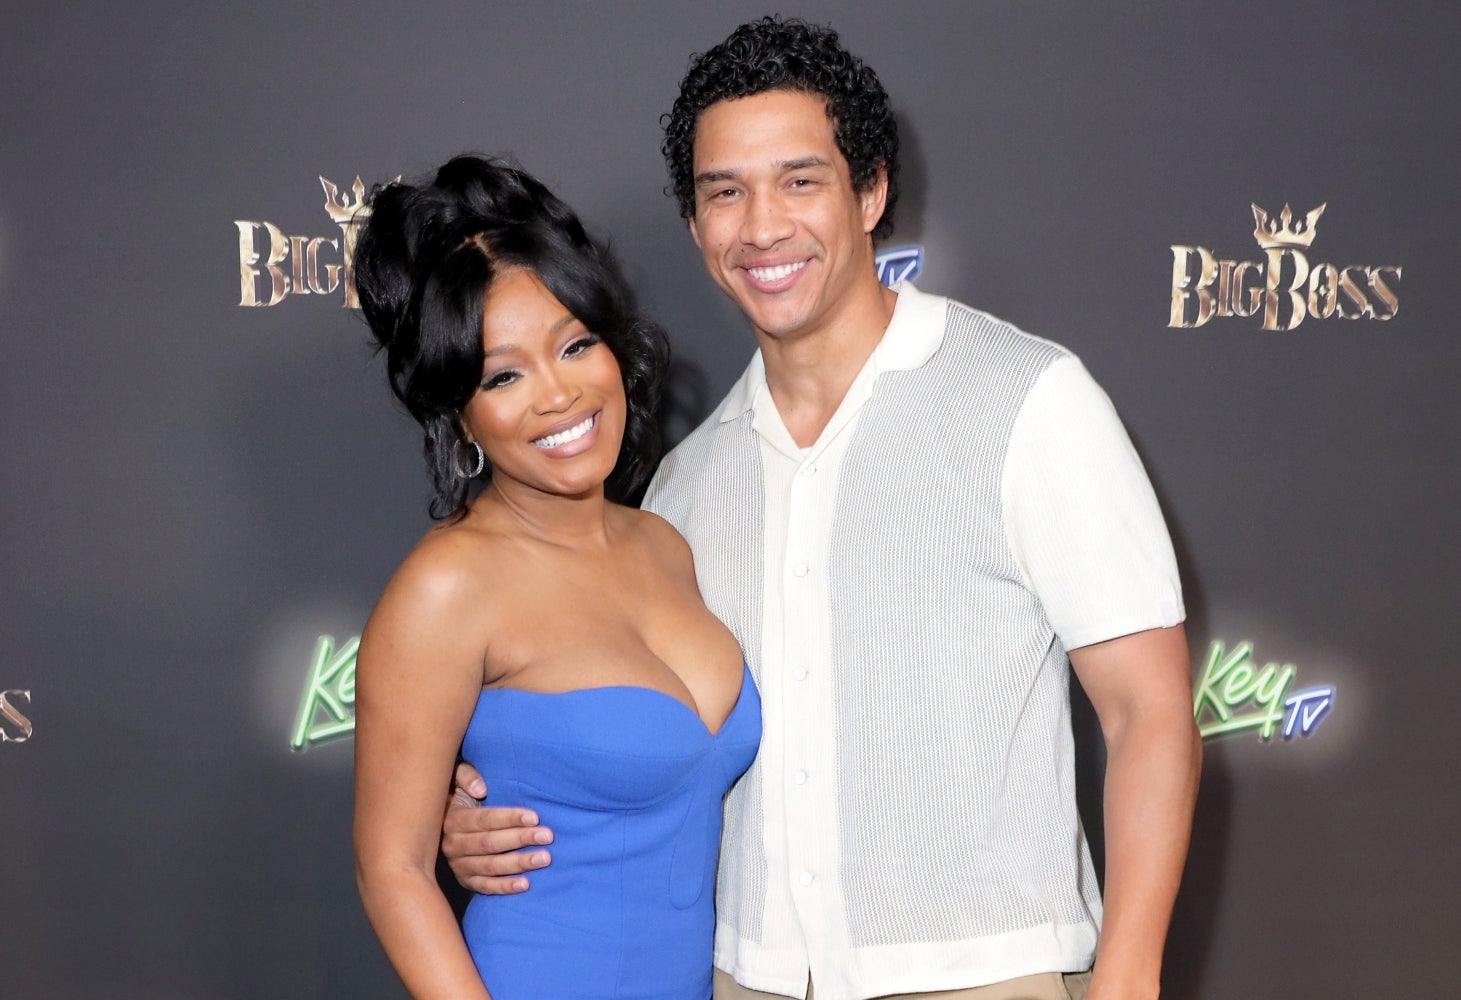 ‘I Was Not Looking For Love. I Was Looking For A Roster’: Keke Palmer Shares How She Met Boyfriend Darius Jackson